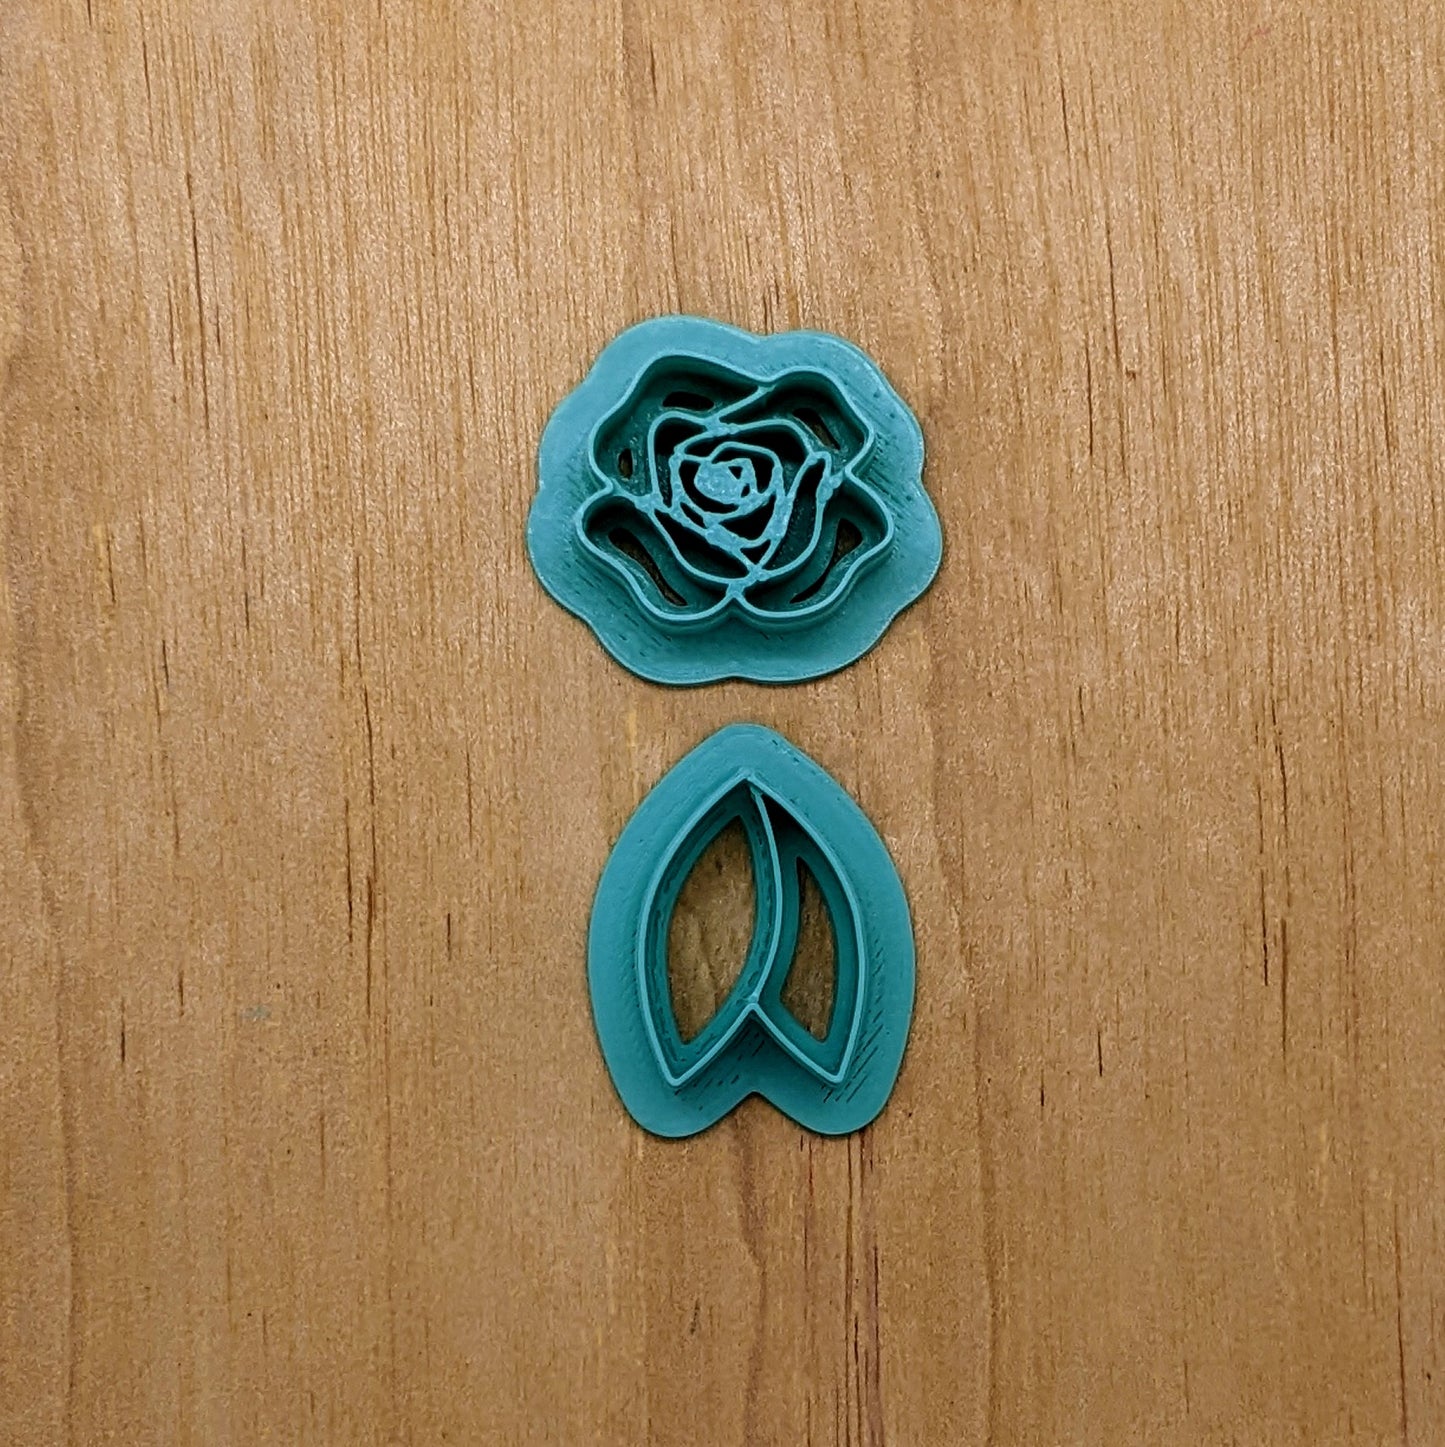 Rose & Leaves, 2 Piece, Polymer Clay Earring Cutter Set